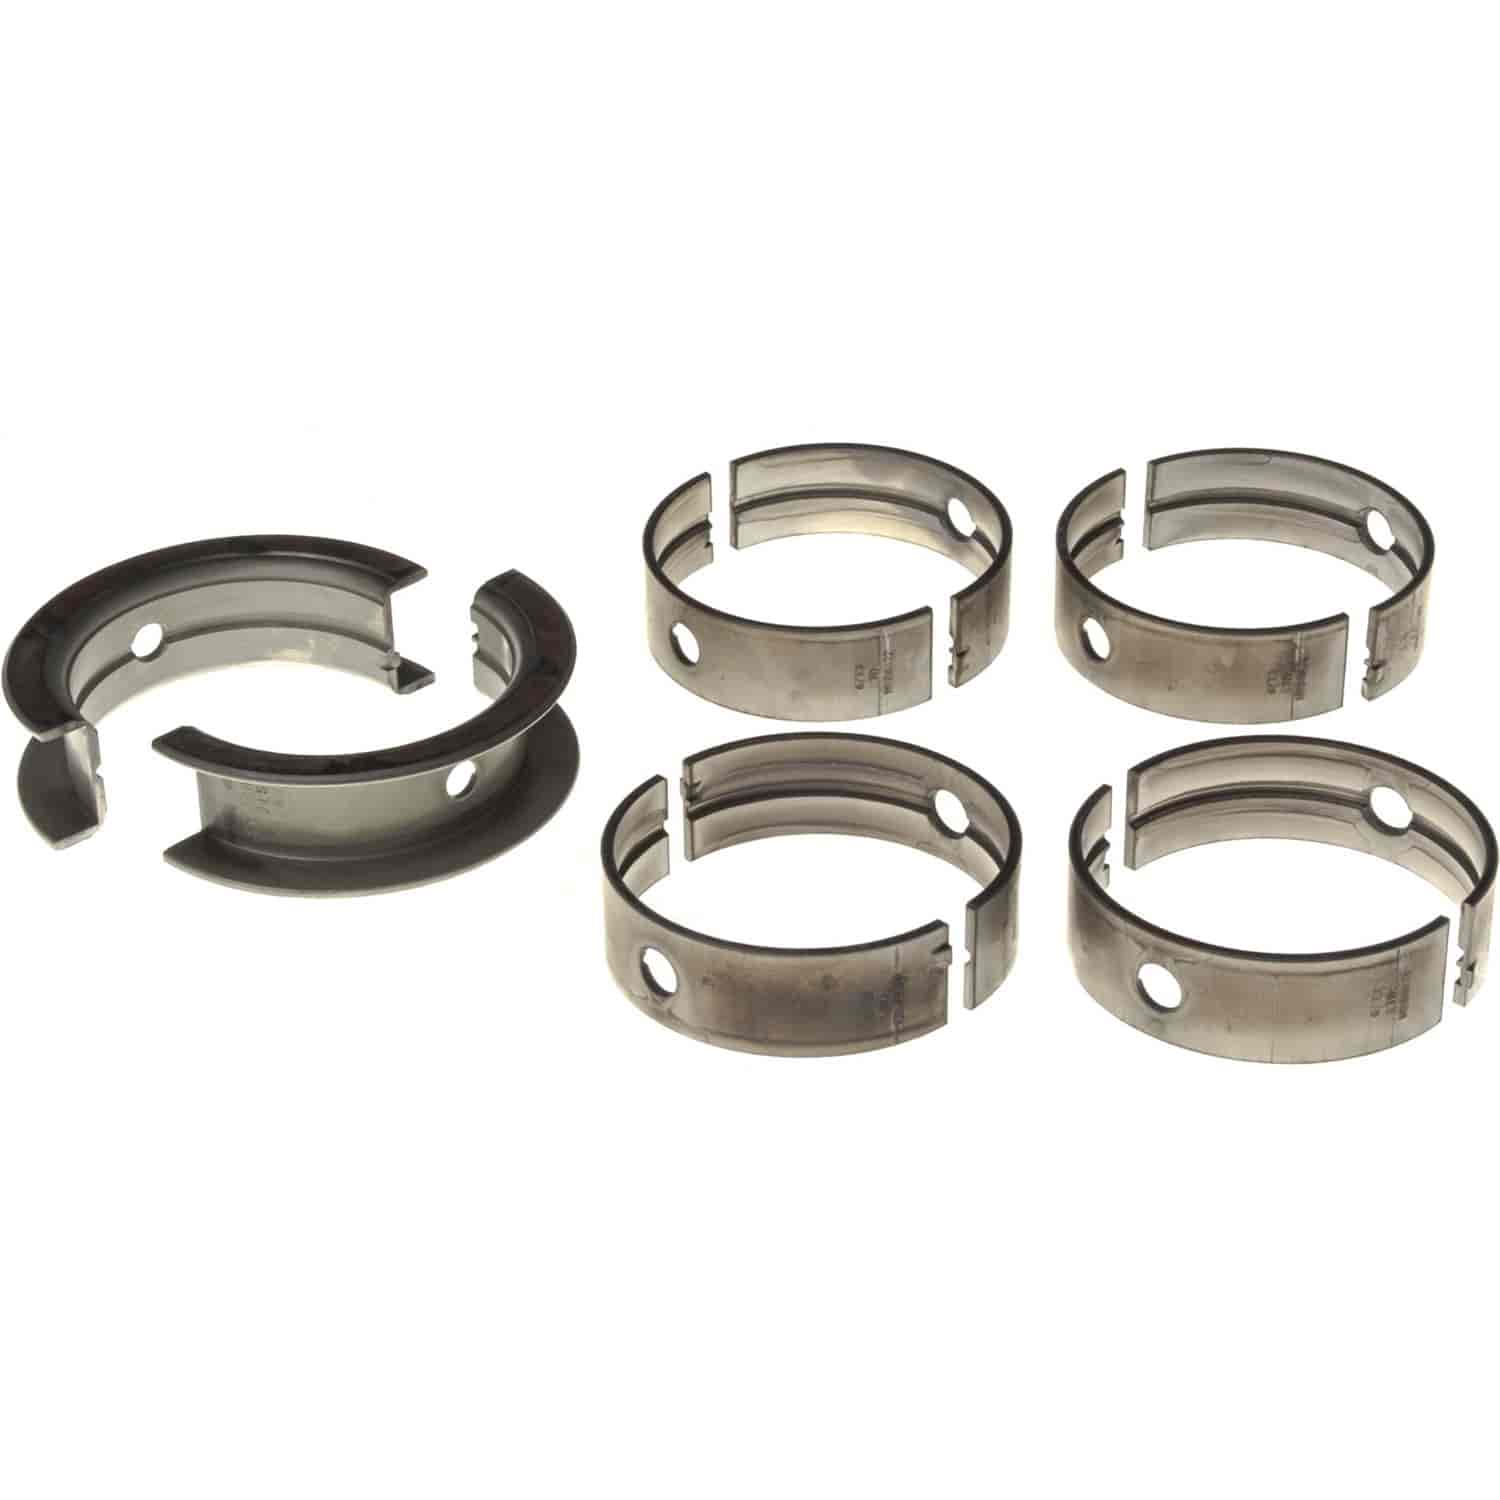 Main Bearing Set Ford 1964-1977 FE V8 352/360/390/410/427/428 (5.8/5.9/6.4/6.7/7.0L) with -.001" Undersize